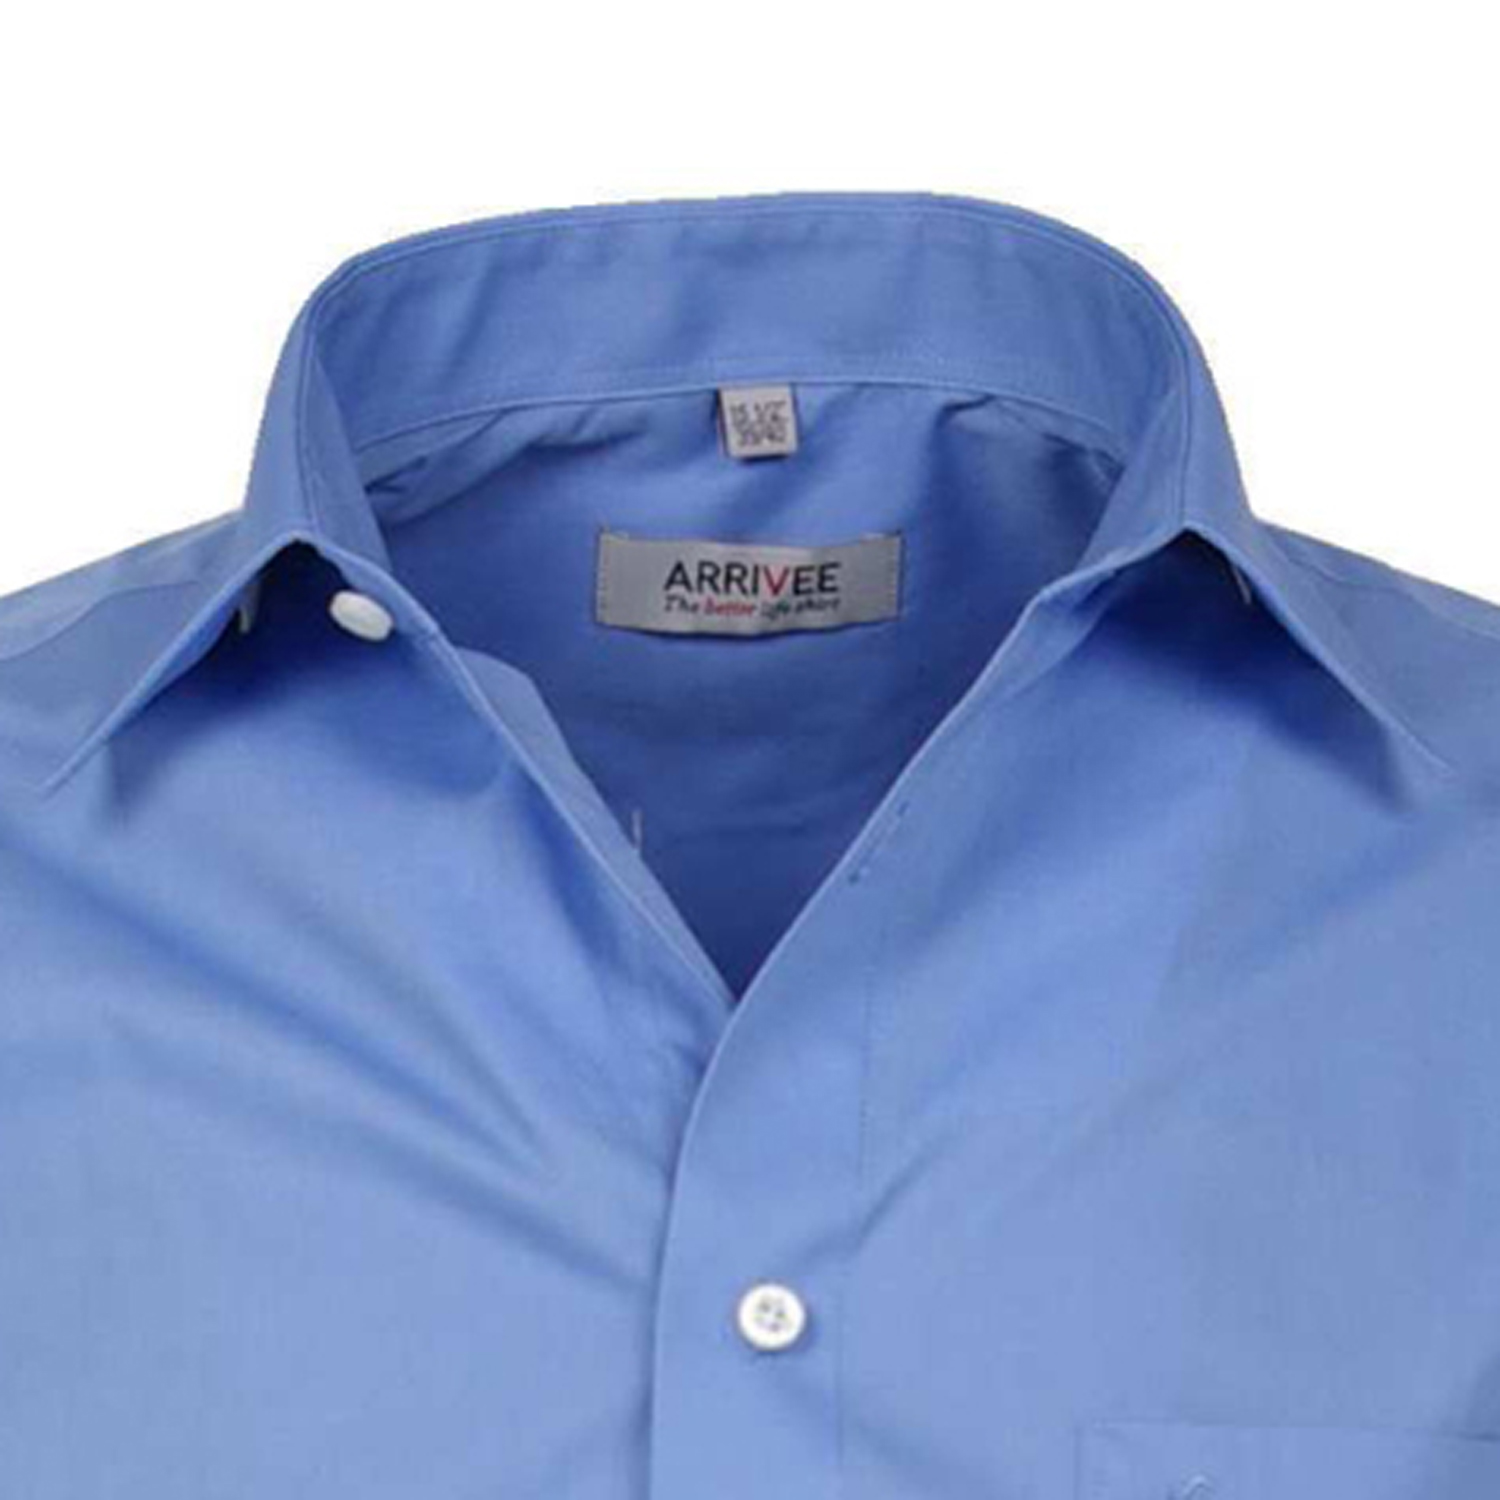 Blue shirt by ARRIVEE in oversizes up to 8XL